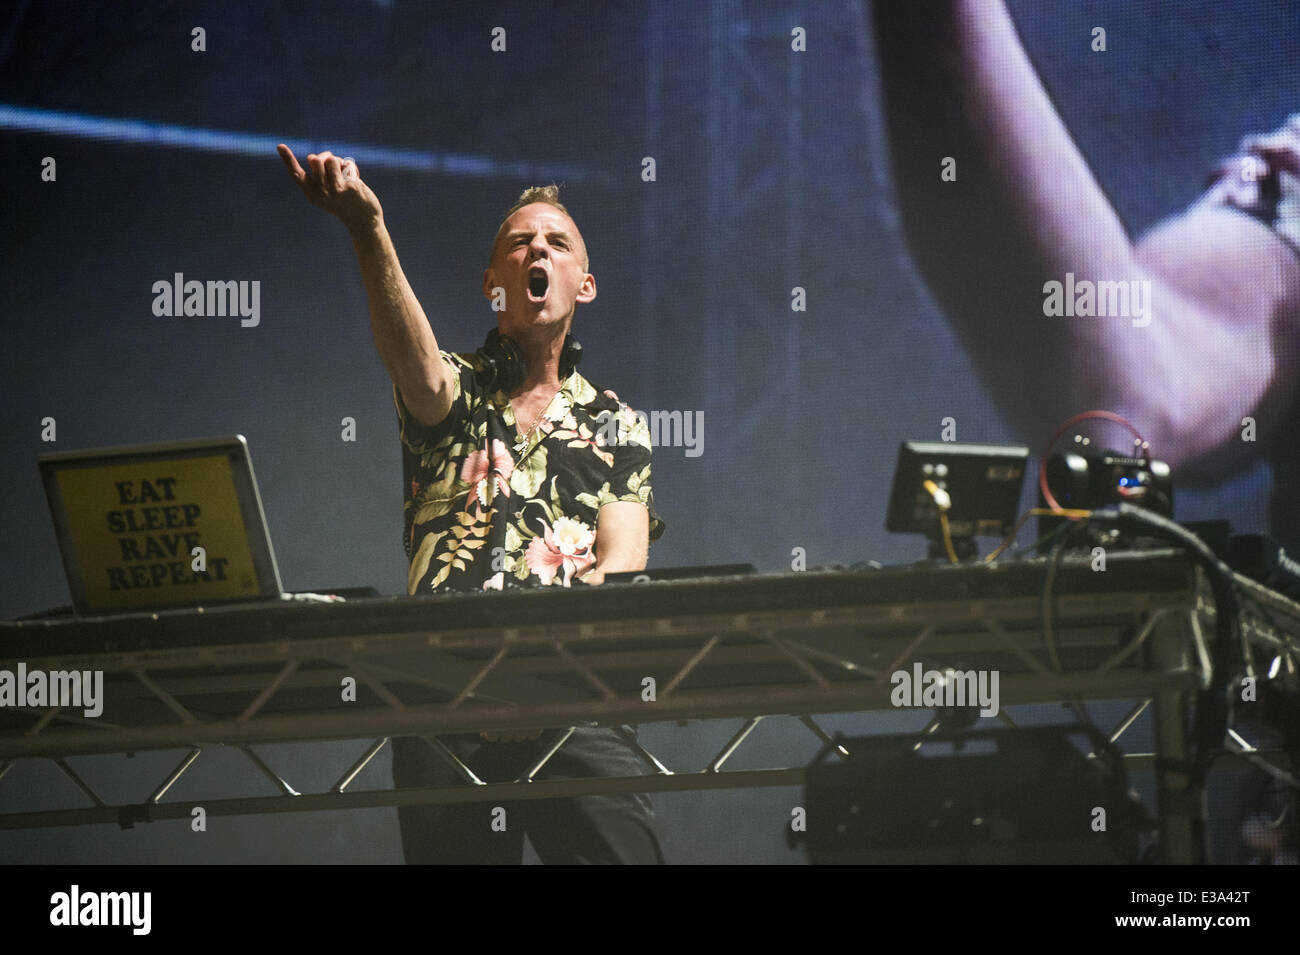 Bestival Isle of Wight - Day 2  Featuring: Norman Cook aka Fat Boy Slim Where: Isle Of Wight, United Kingdom When: 06 Sep 2013 C Stock Photo